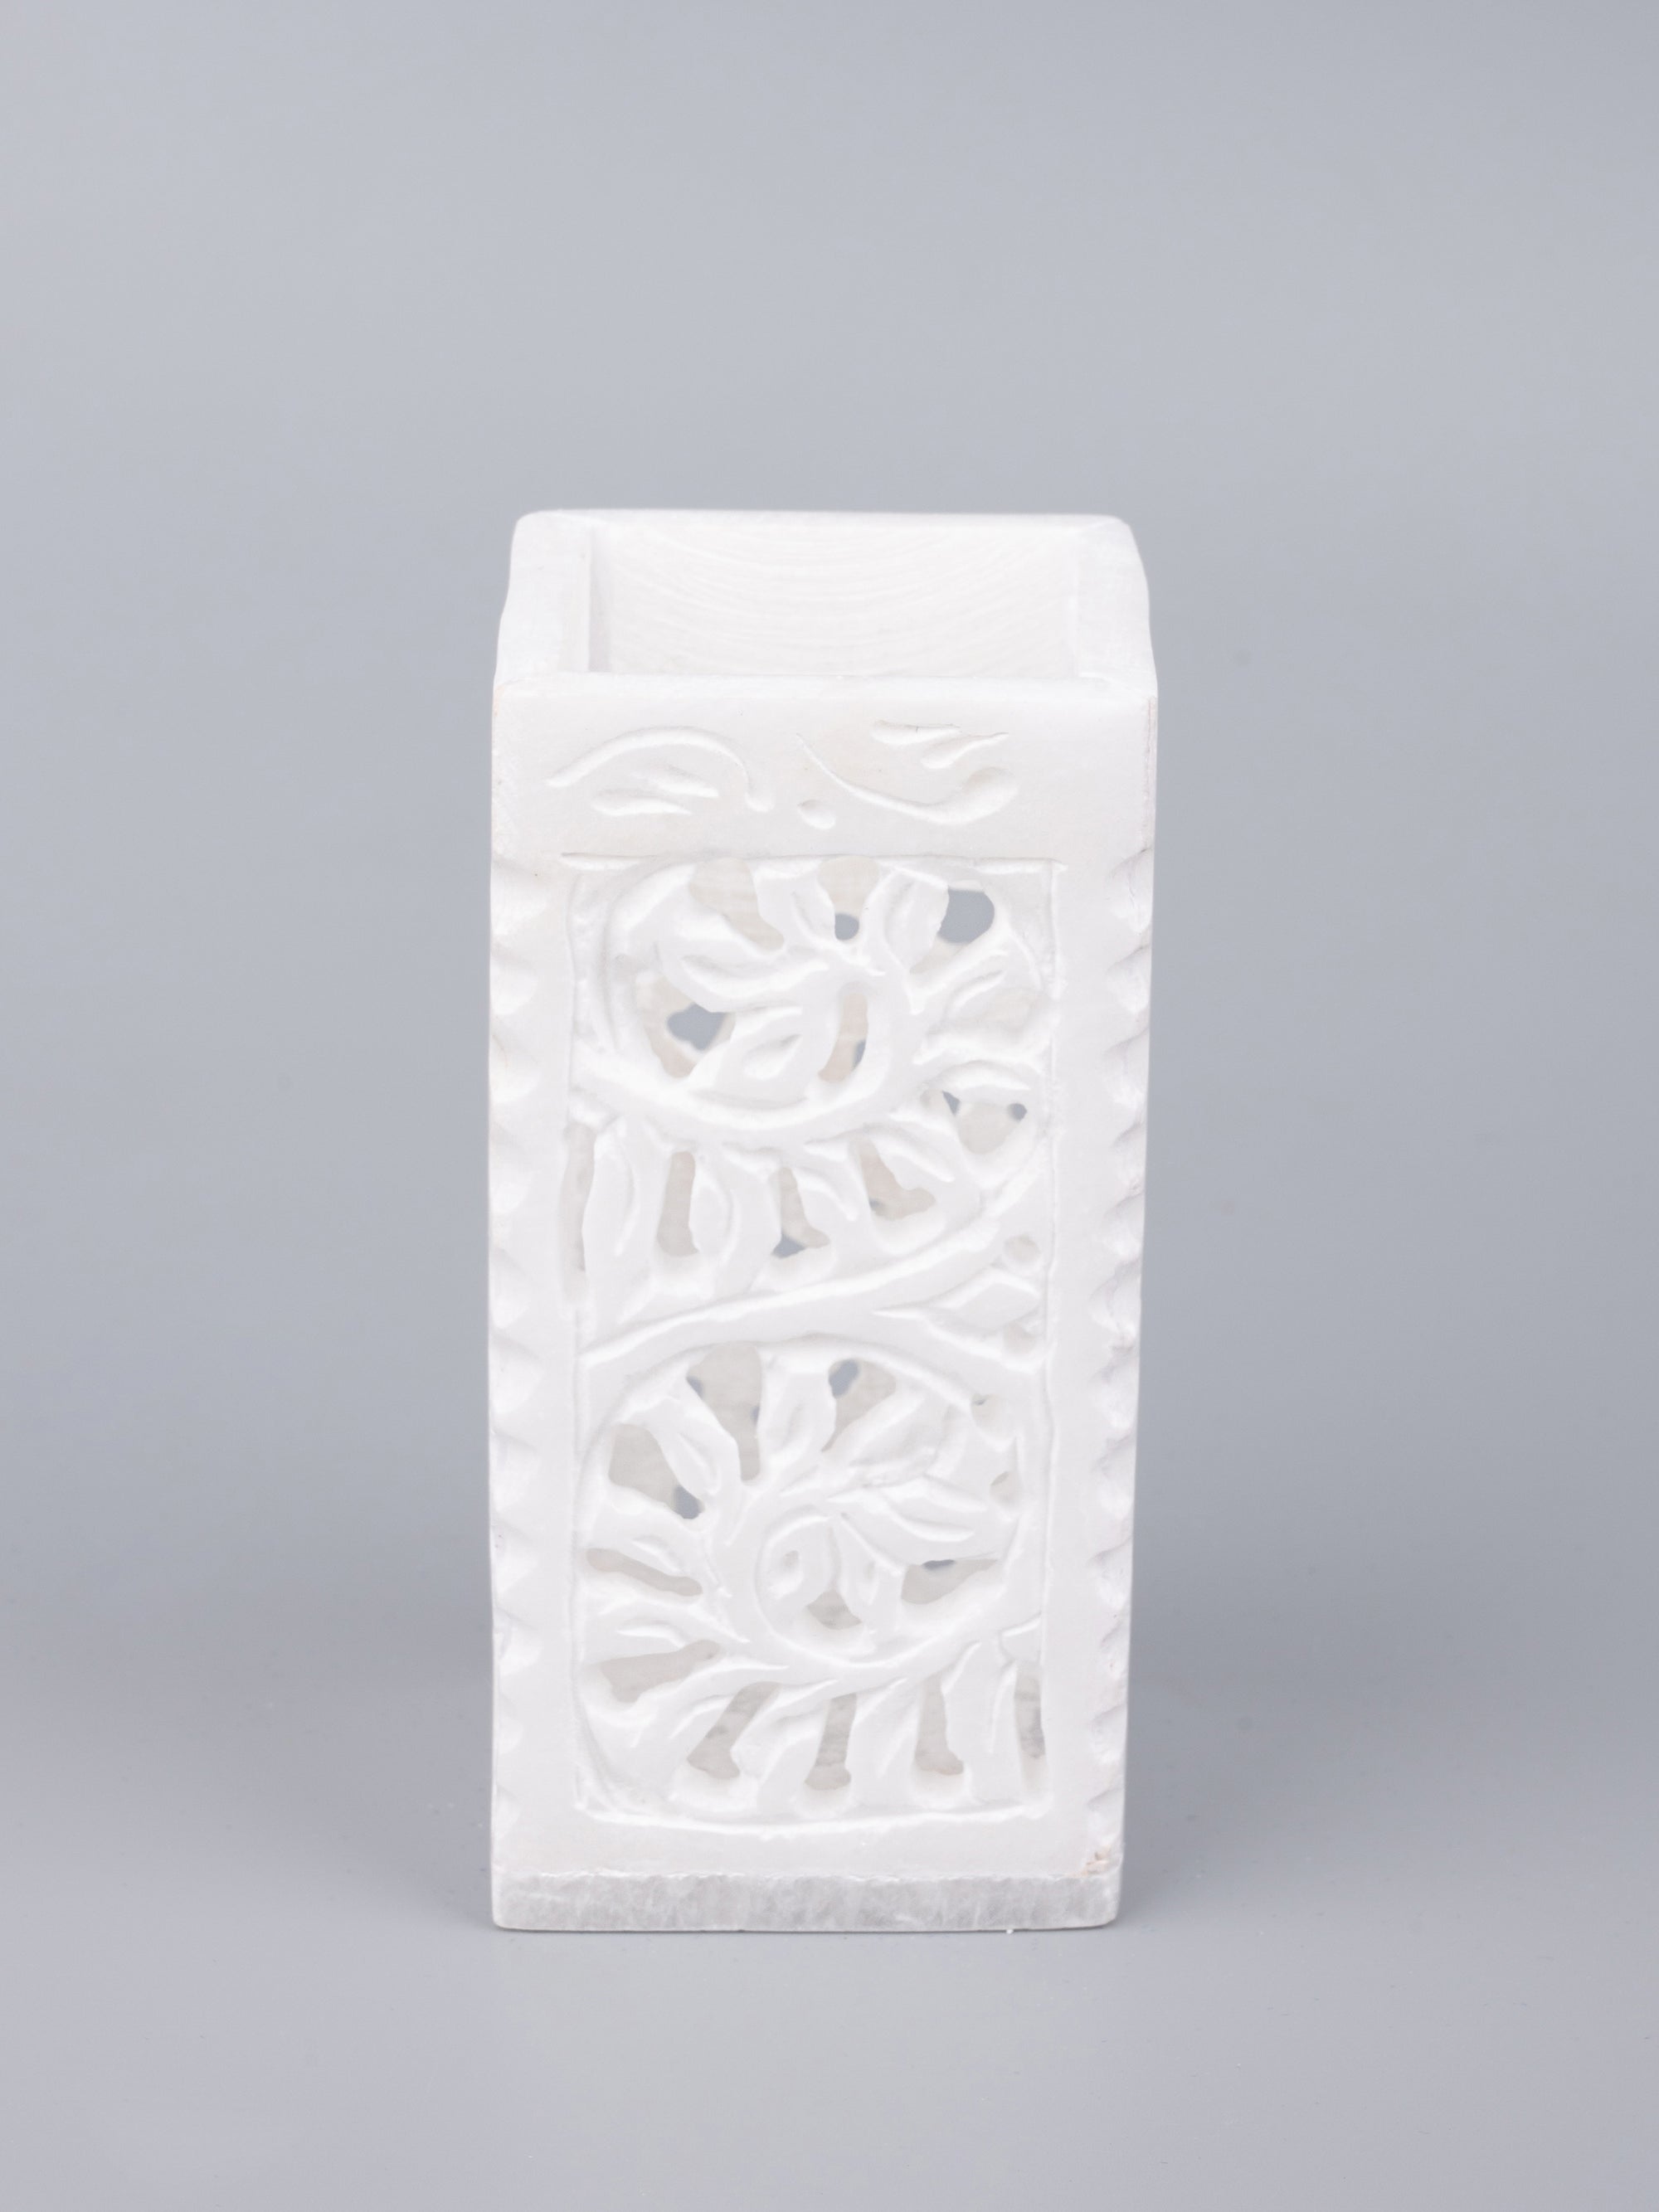 White marble crafted pen holder - The Heritage Artifacts